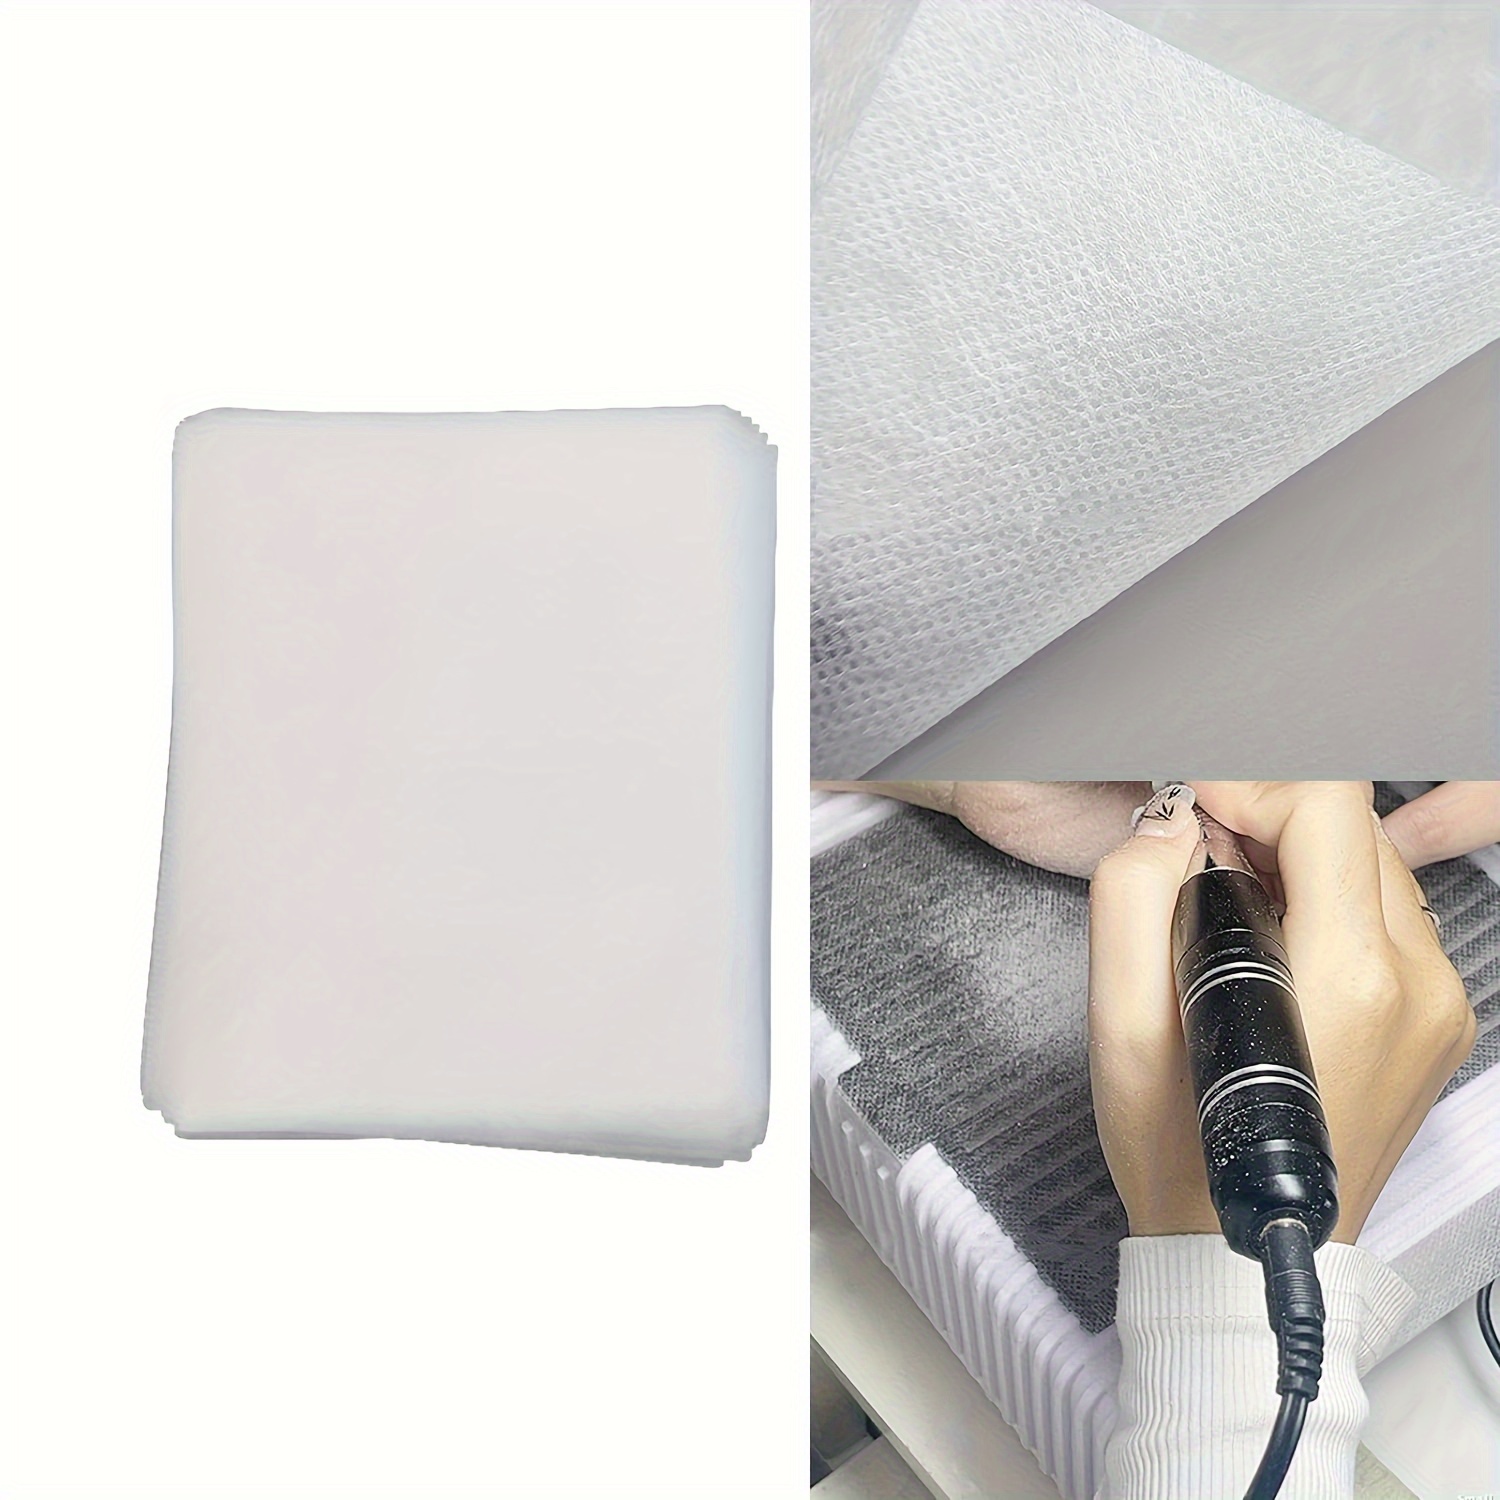 

Nail Dust Collector Filters, Vacuum Cleaner Filter Paper, Portable Suction Dust Screens For Nail Salons & Manicure Stations